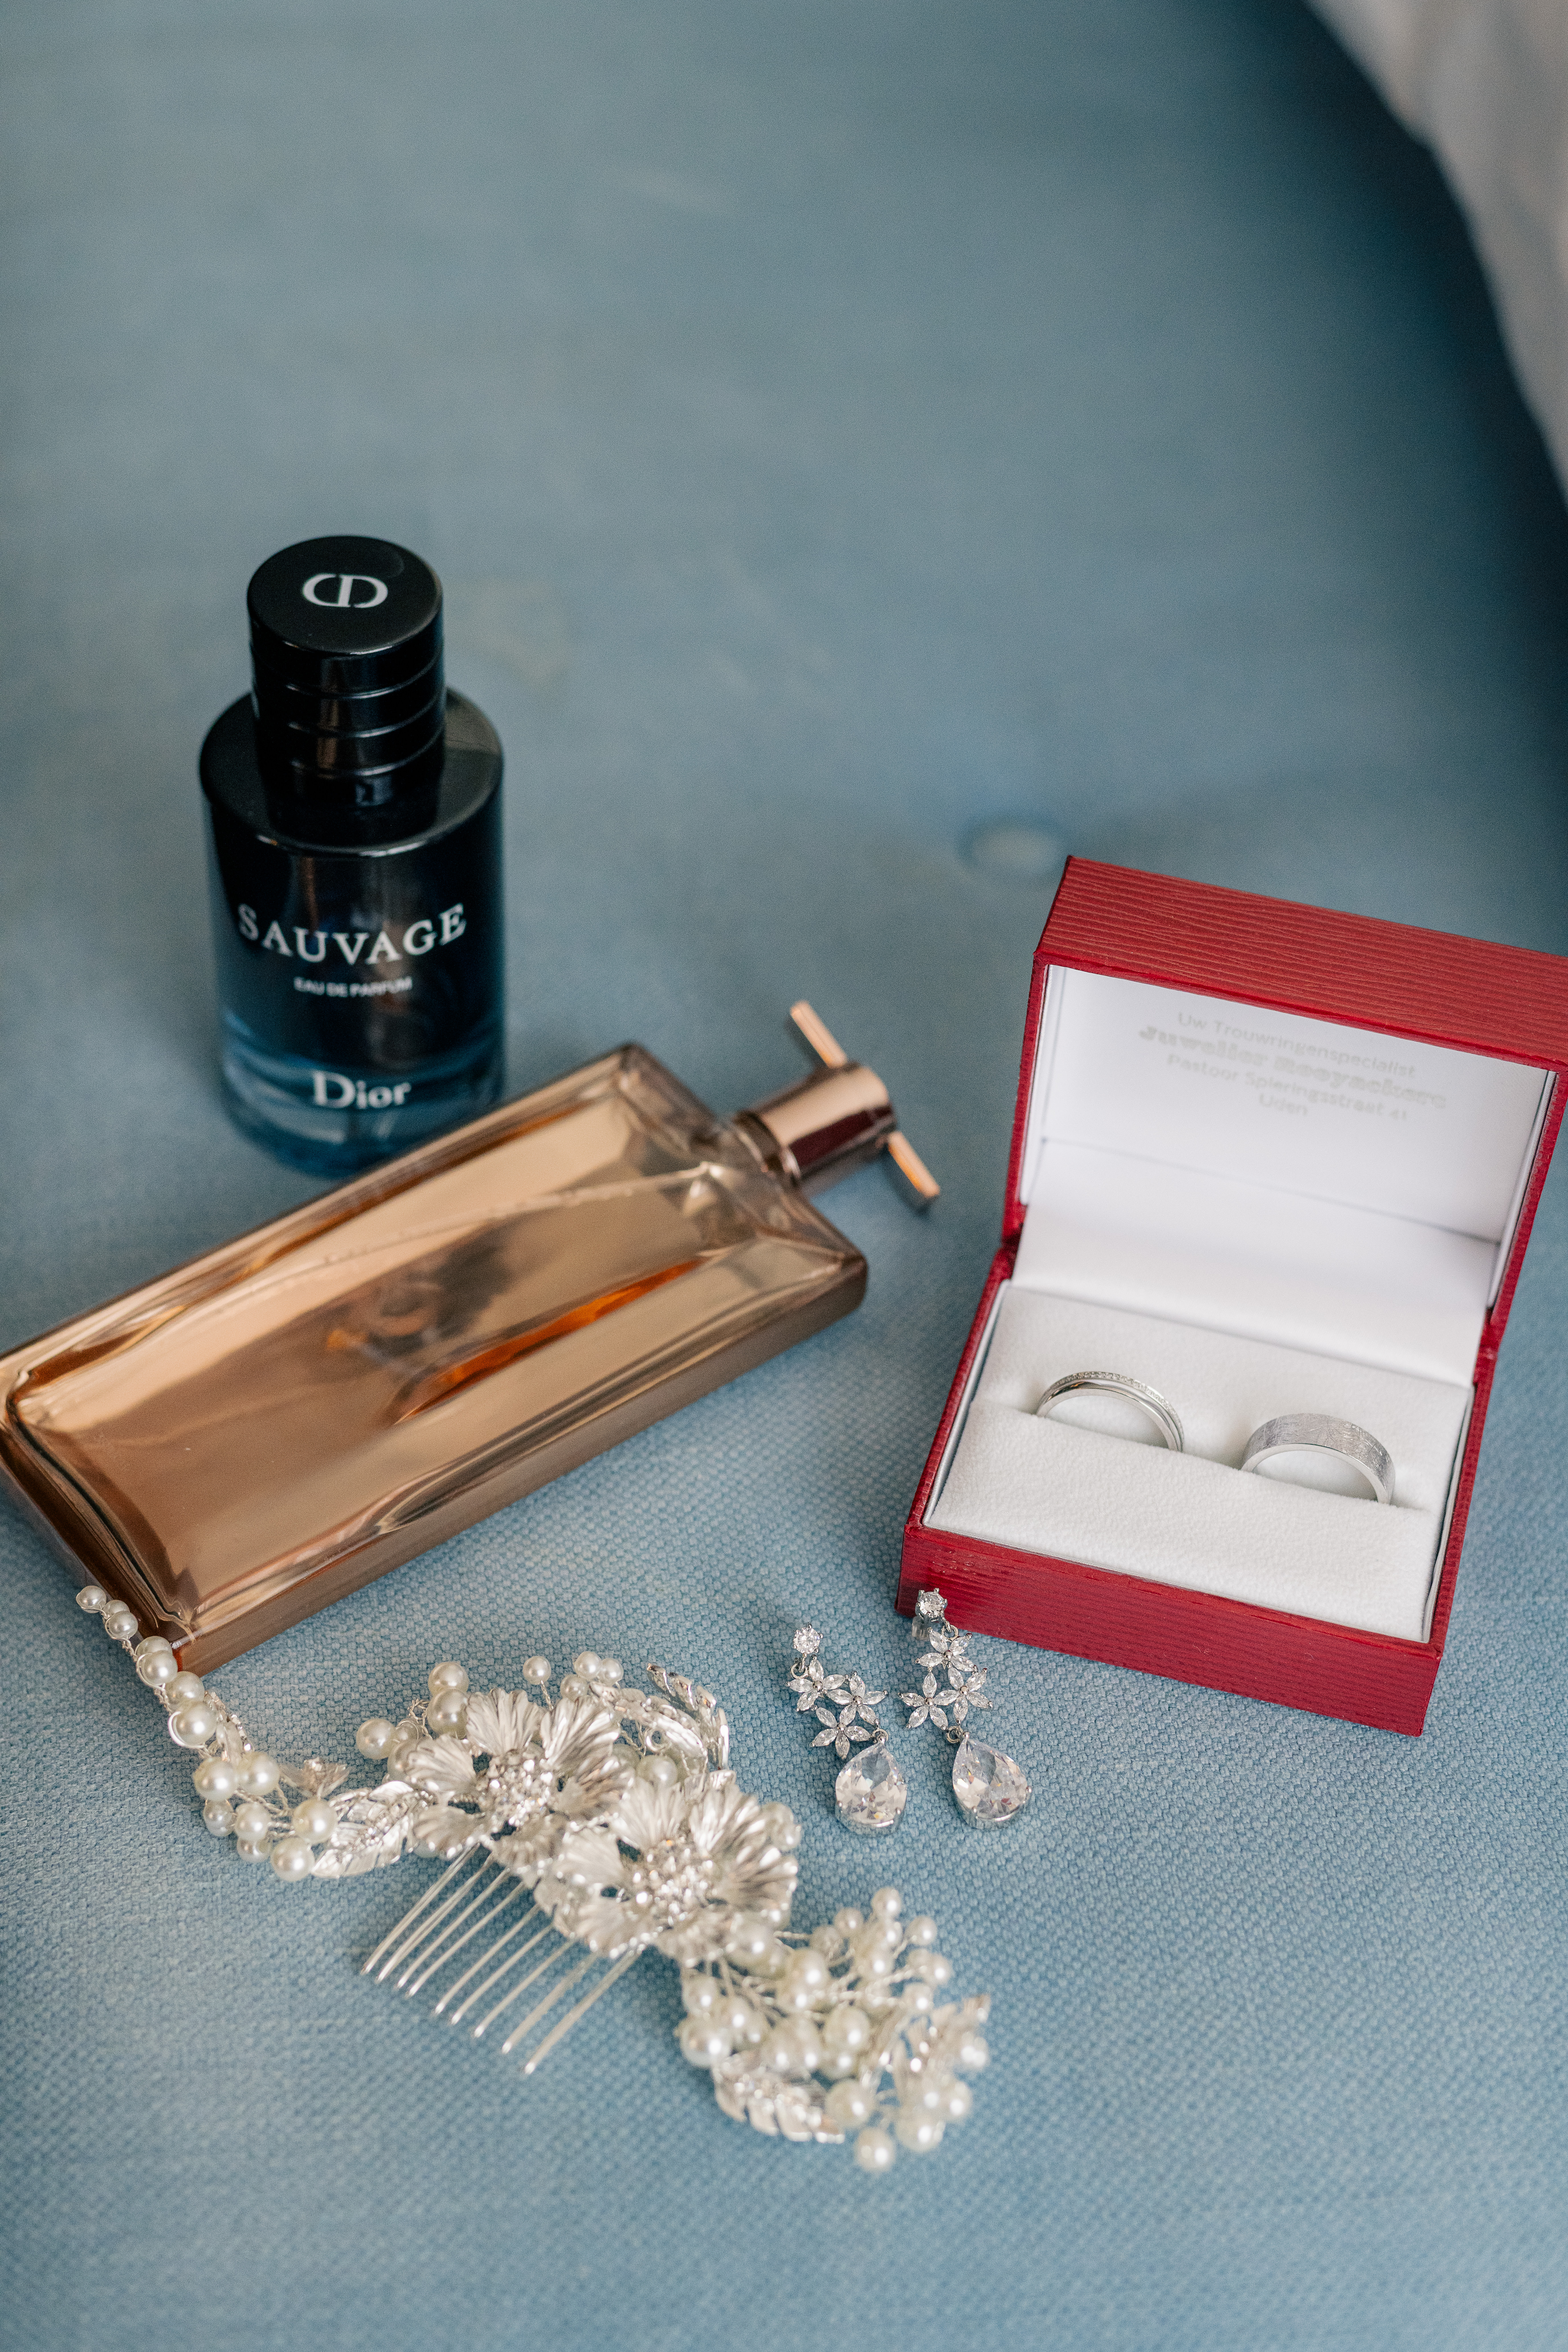 wedding details on a blue upholstered bench of a bridal hair comb, earrings, rings, perfume and cologne